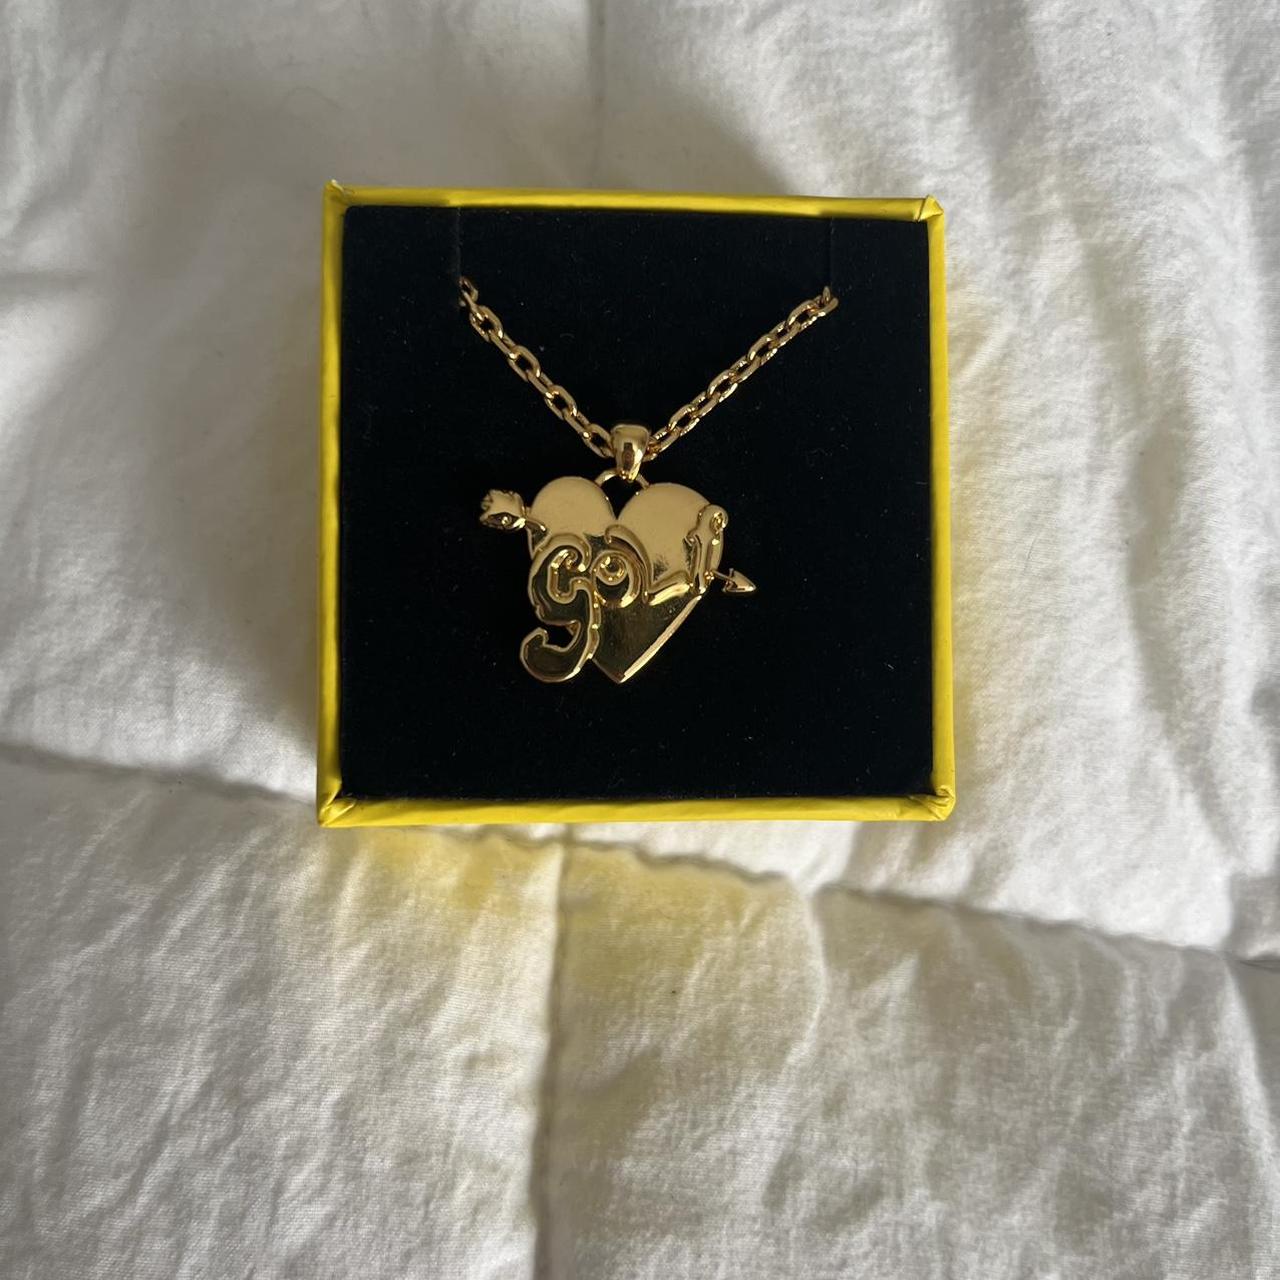 cupid necklace by GOLF WANG 14K GOLD PLATED NECKLACE... - Depop